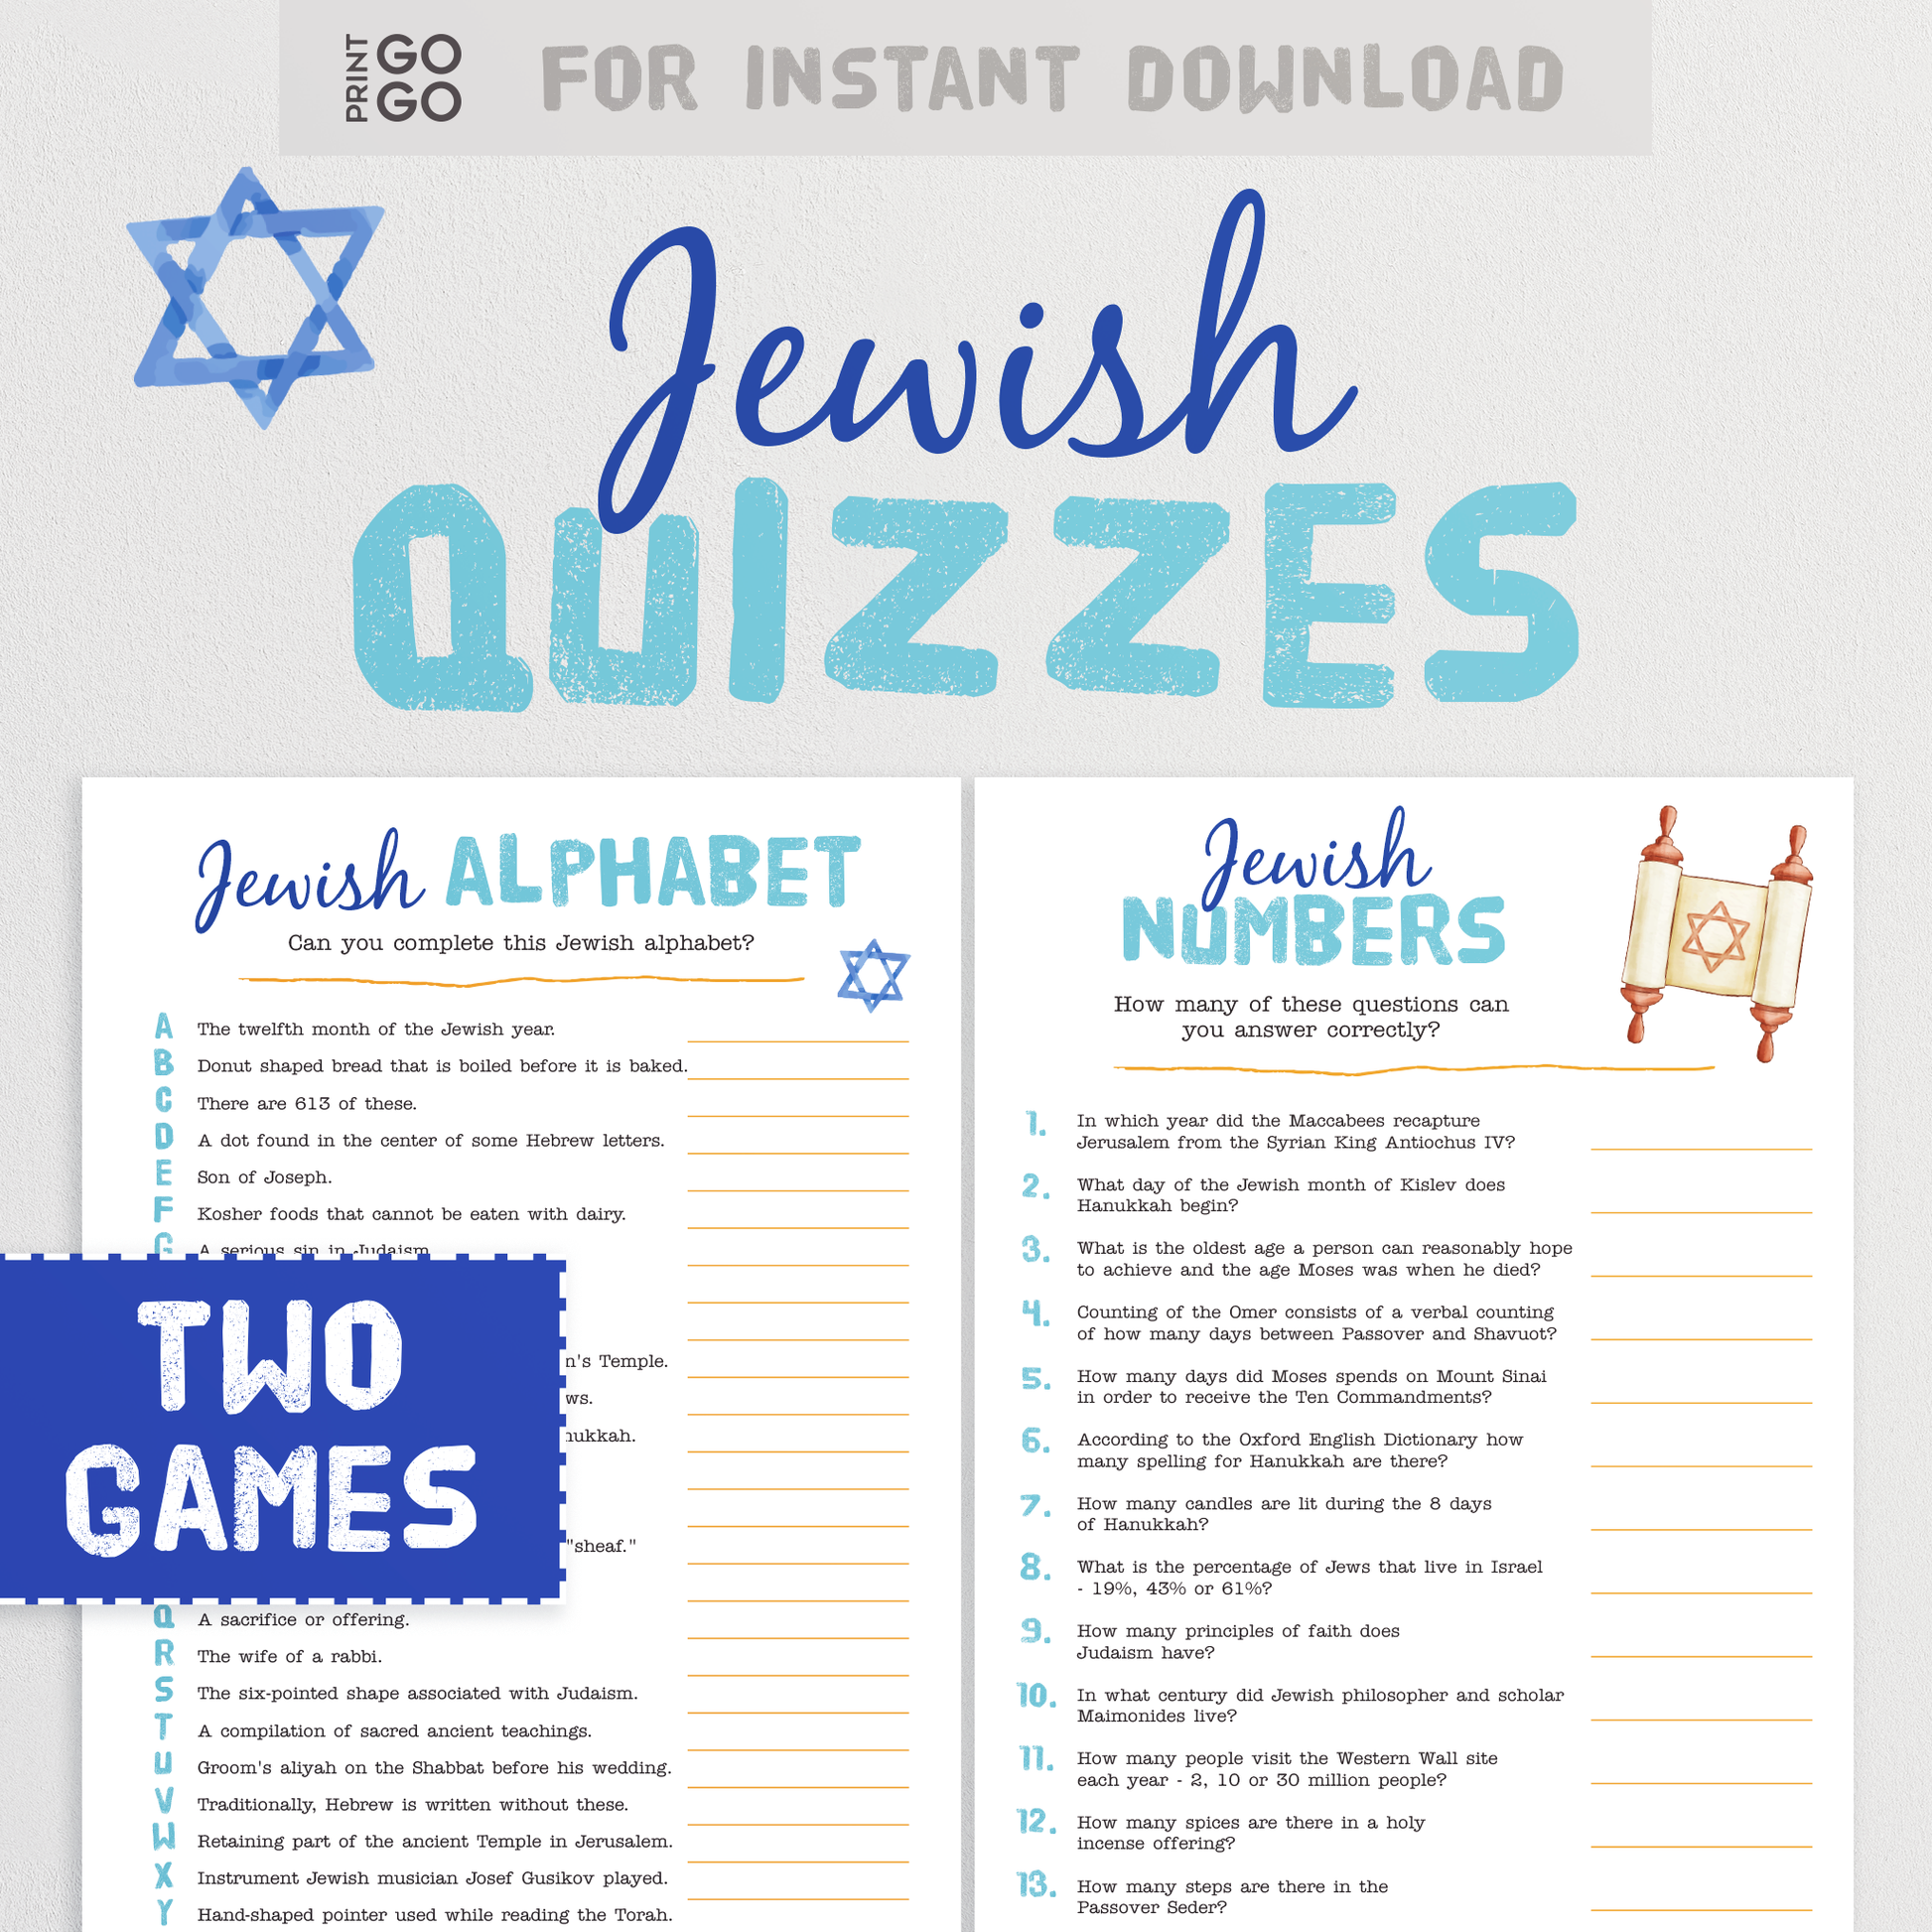 Jewish Trivia Quizzes - Test Your General Knowledge With These Fun Family Quiz Party Games | Activities for Hanukkah and Passover